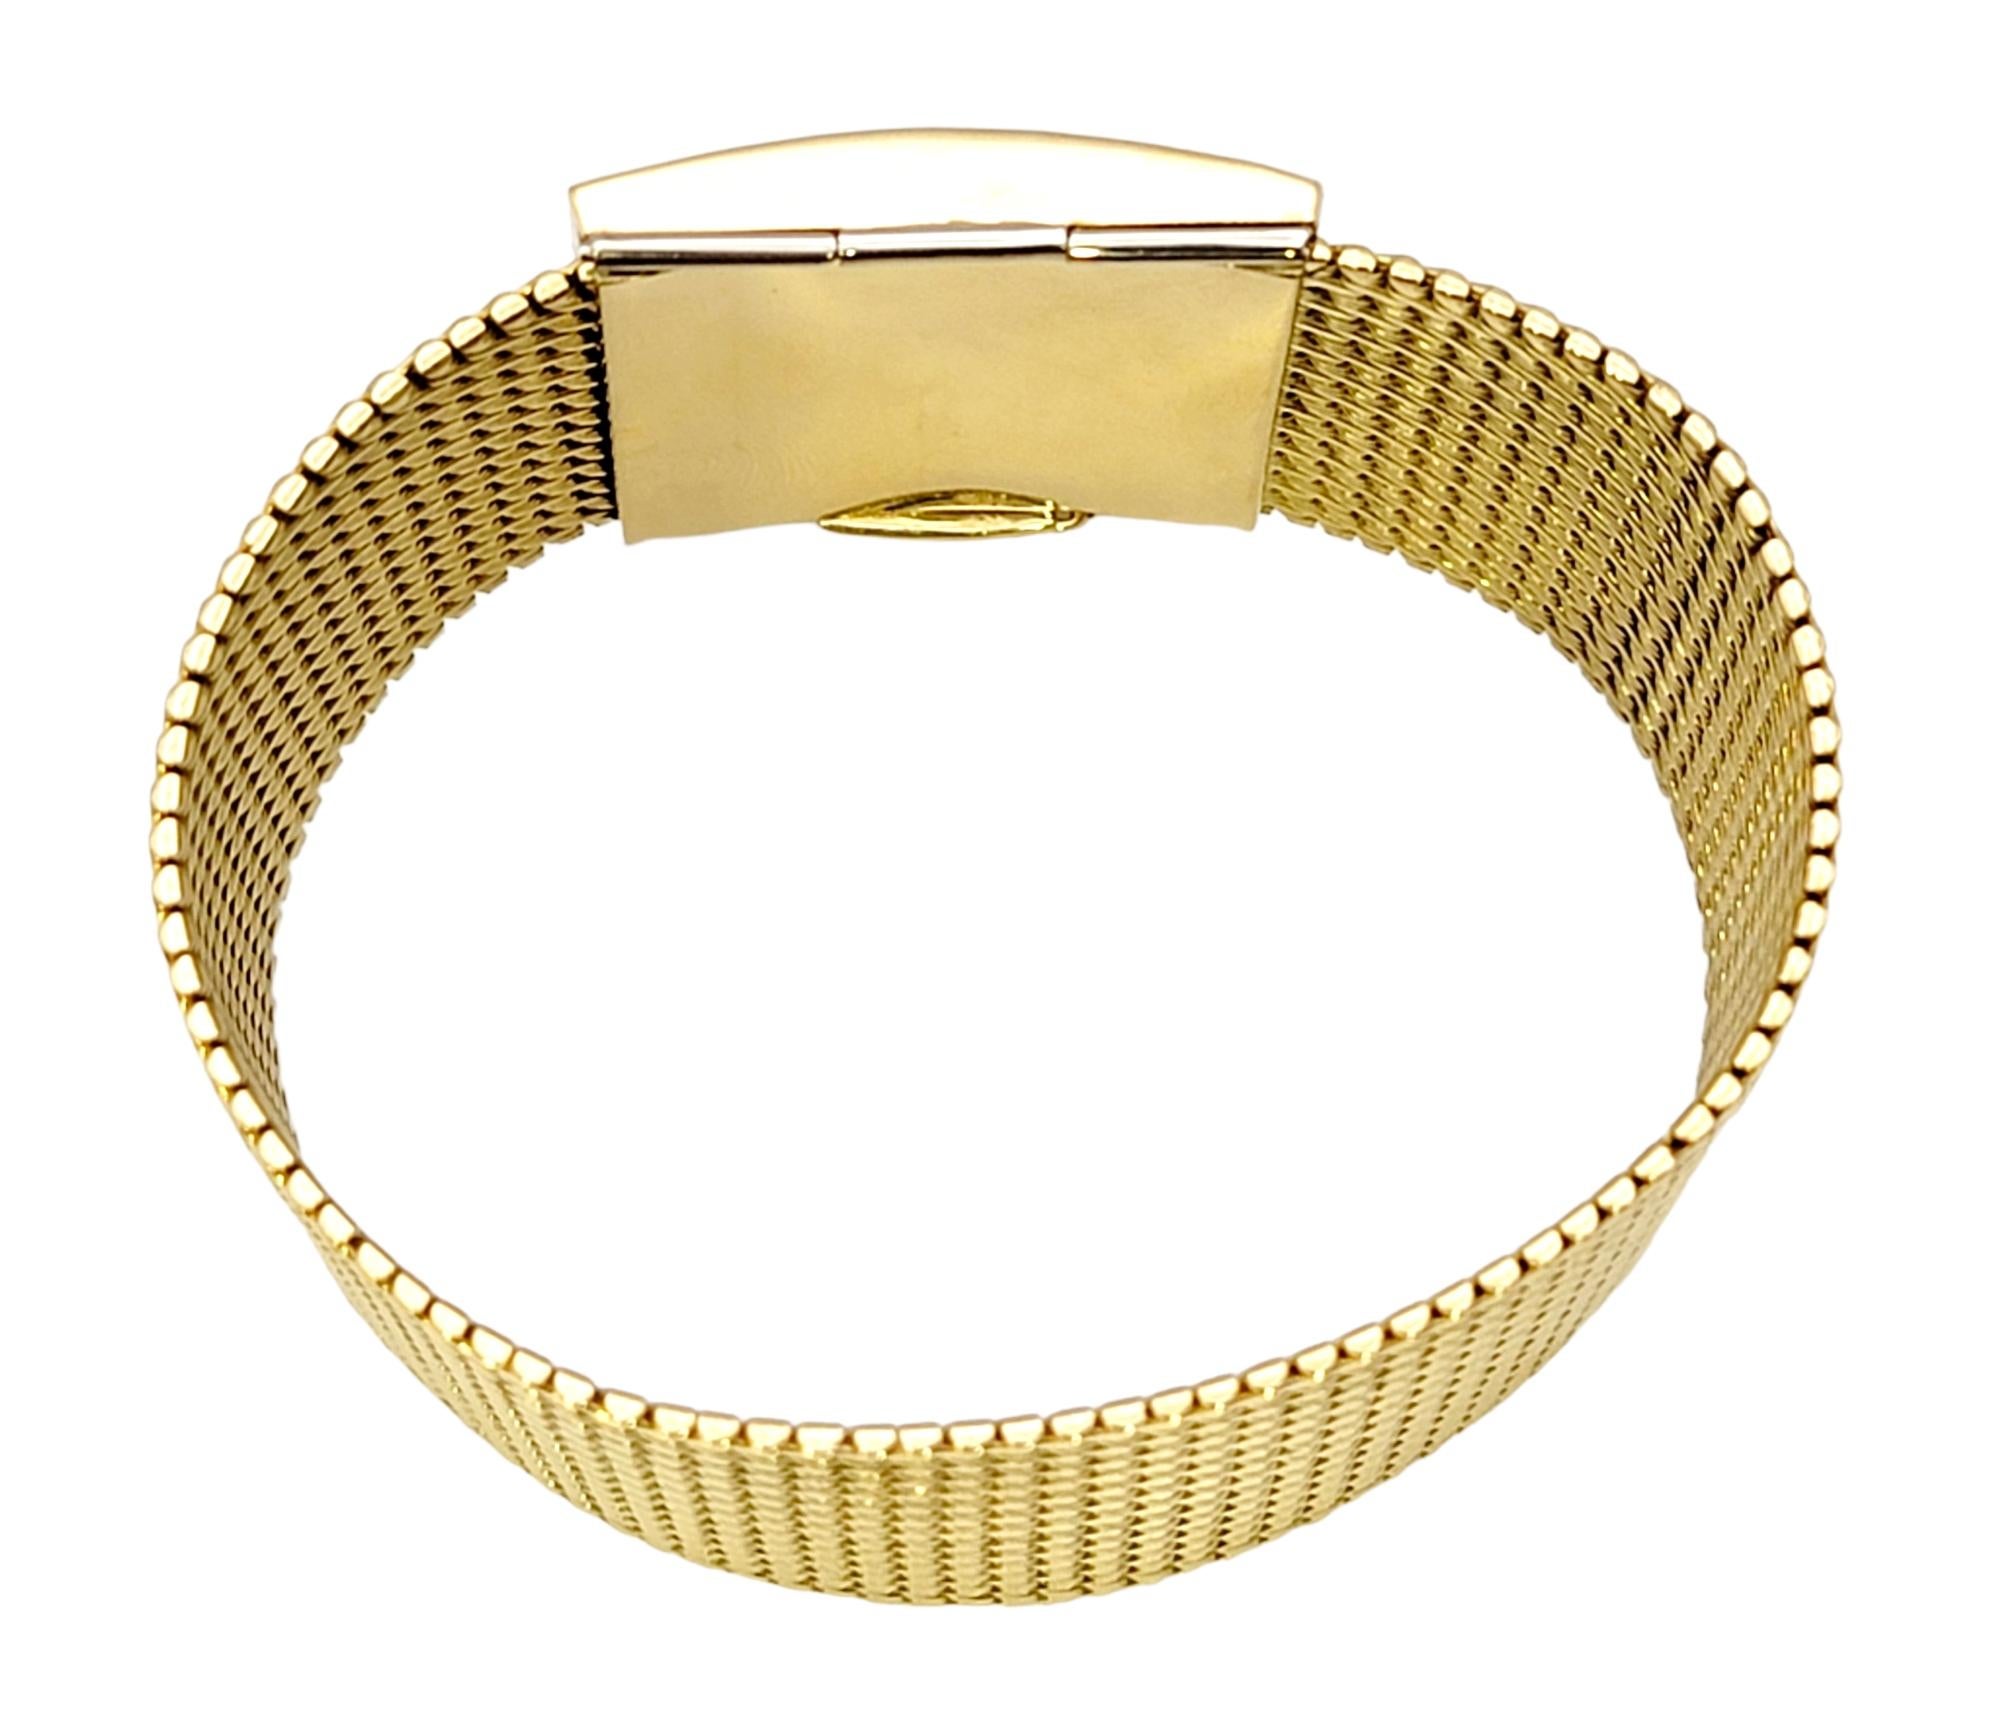 Vintage Textured 18 Karat Yellow Gold Wide Mesh Bracelet with Big Square Clasp In Good Condition For Sale In Scottsdale, AZ